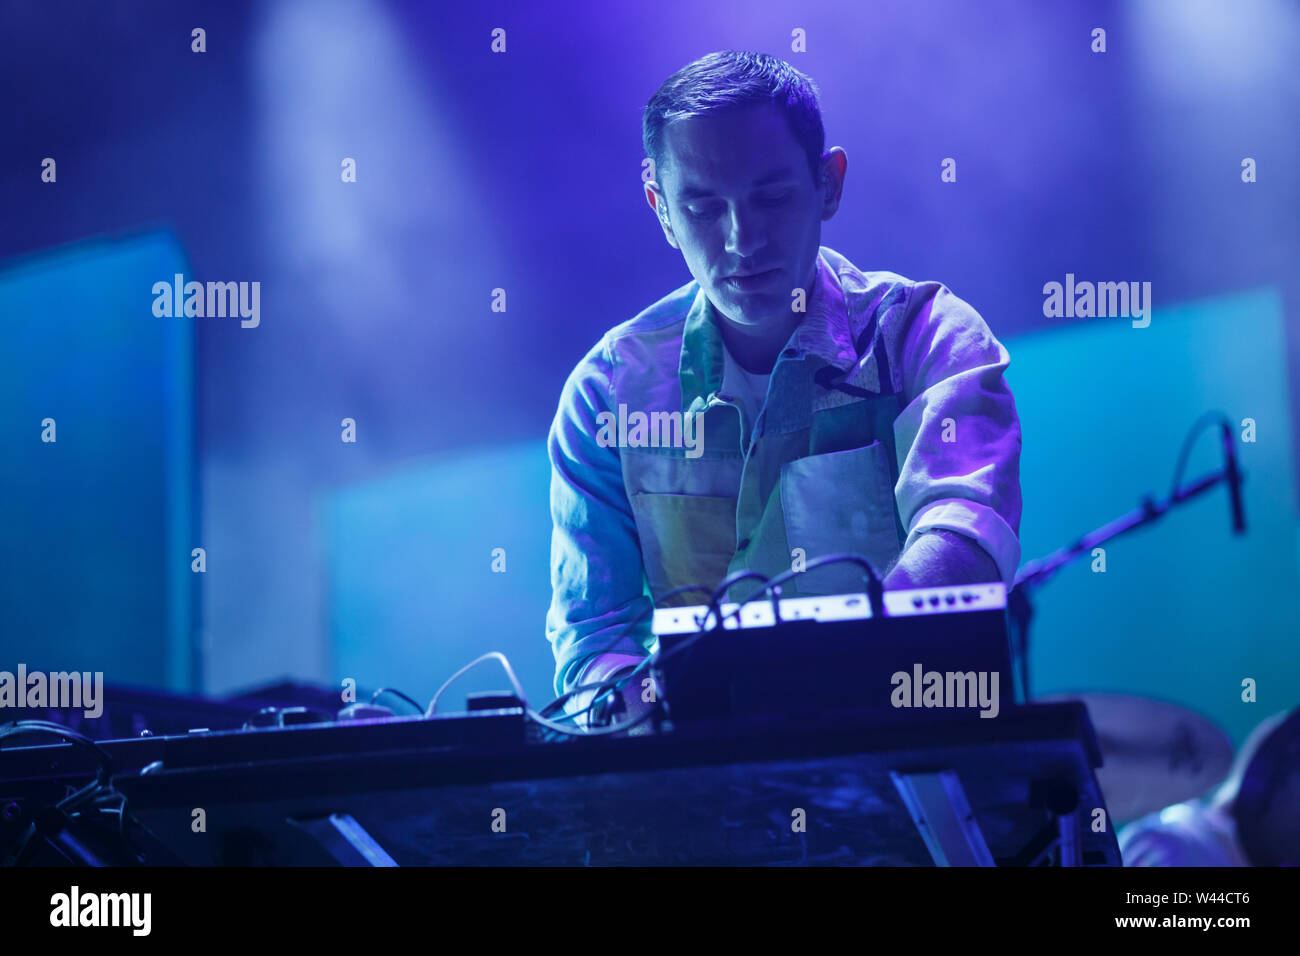 Jodrell Bank, Cheshire. 19th July, 2019. Hot Chip perform live on the Main Stage at Bluedot Festival 2019 held in the shadow of the Lovell Telescope. Stock Photo